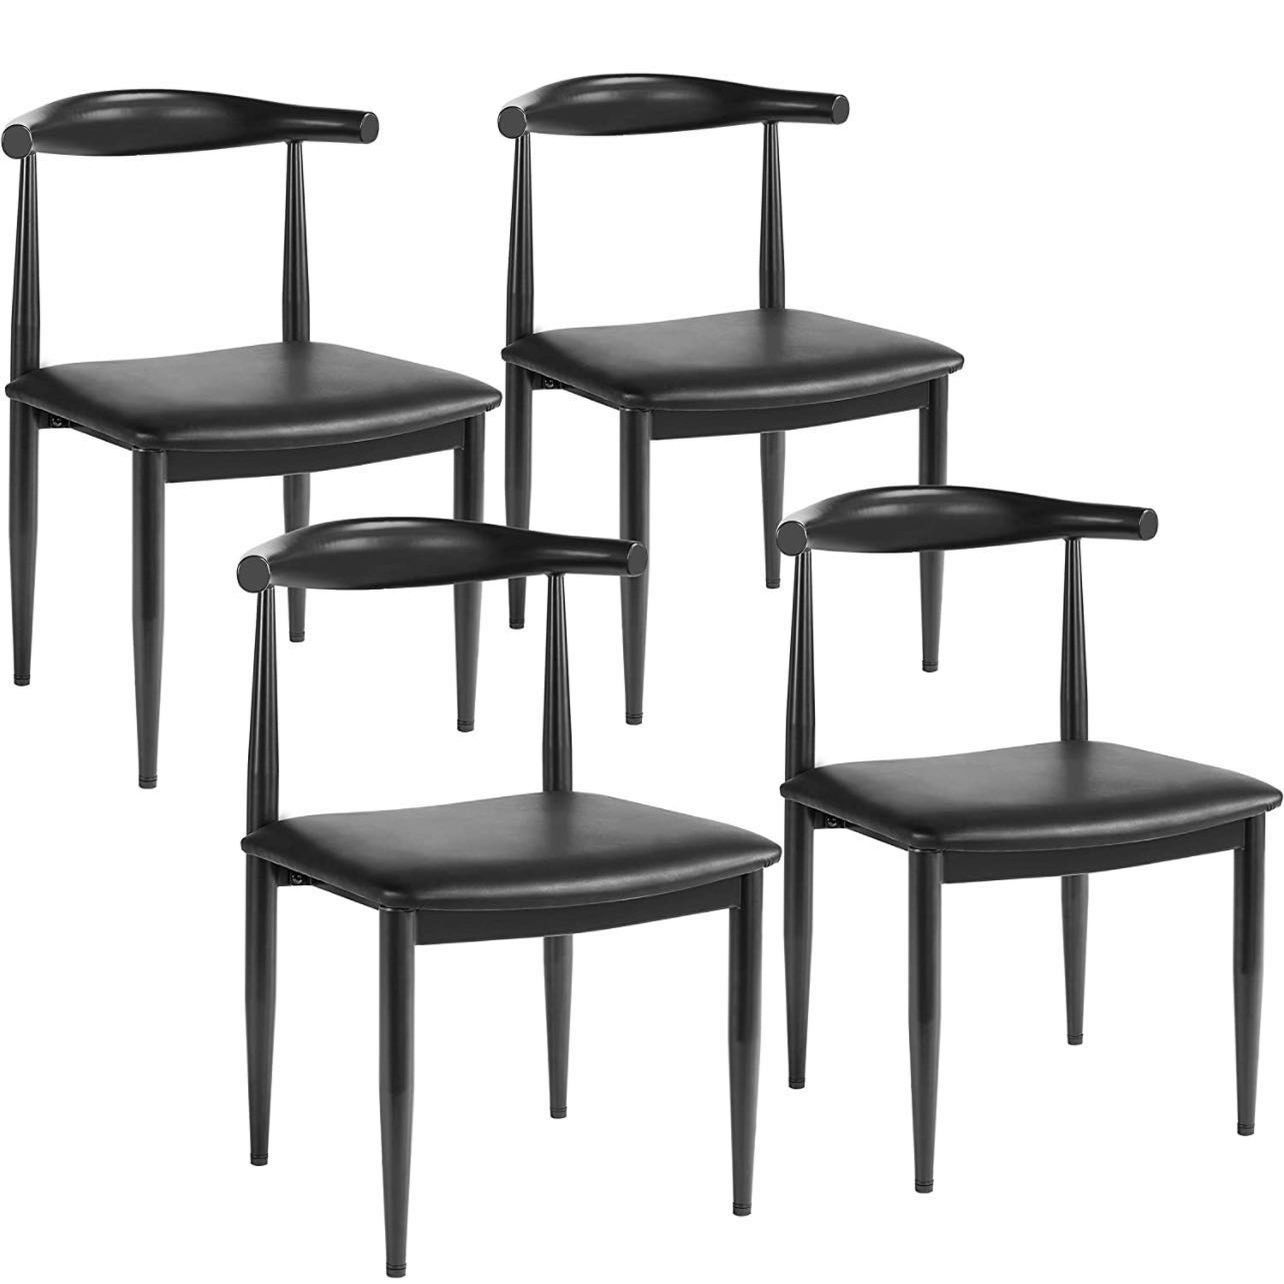 Mid Century Dining Chairs Armless with Backrest Modern Kitchen Chairs Metal Legs Fabric Leather Seat Set of 4, Black612599